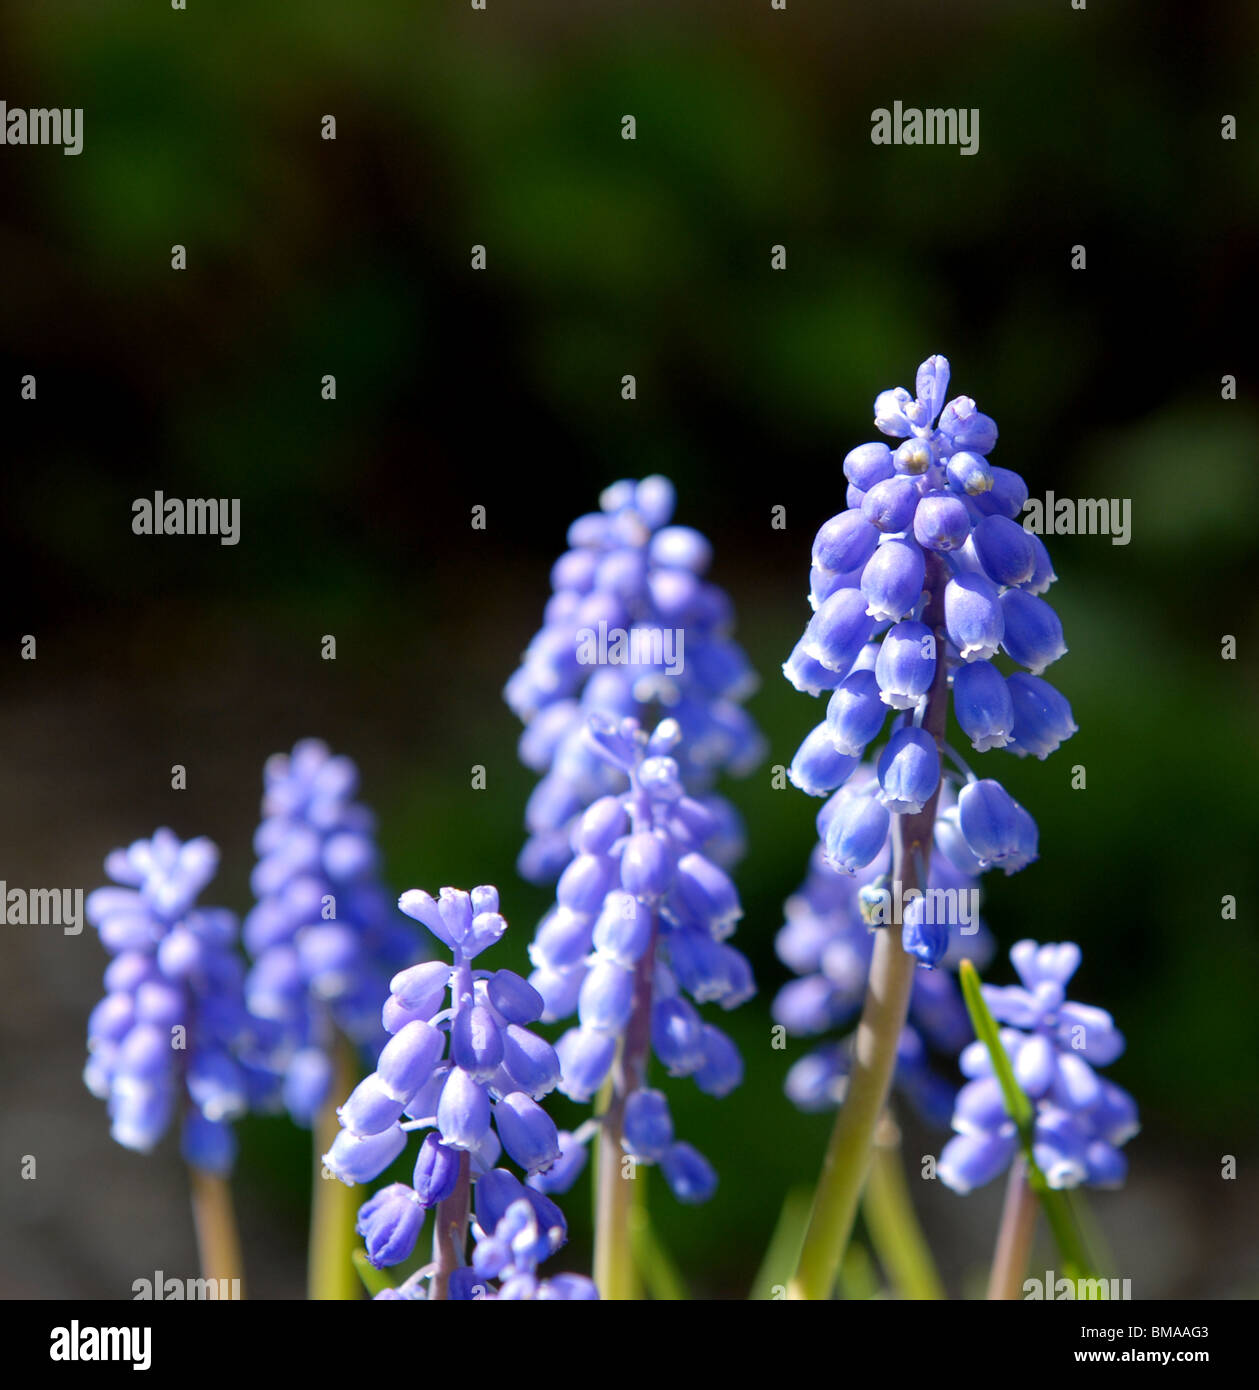 Close up detail of a Grape Hyacinth, of the genus Muscari, flower head Stock Photo